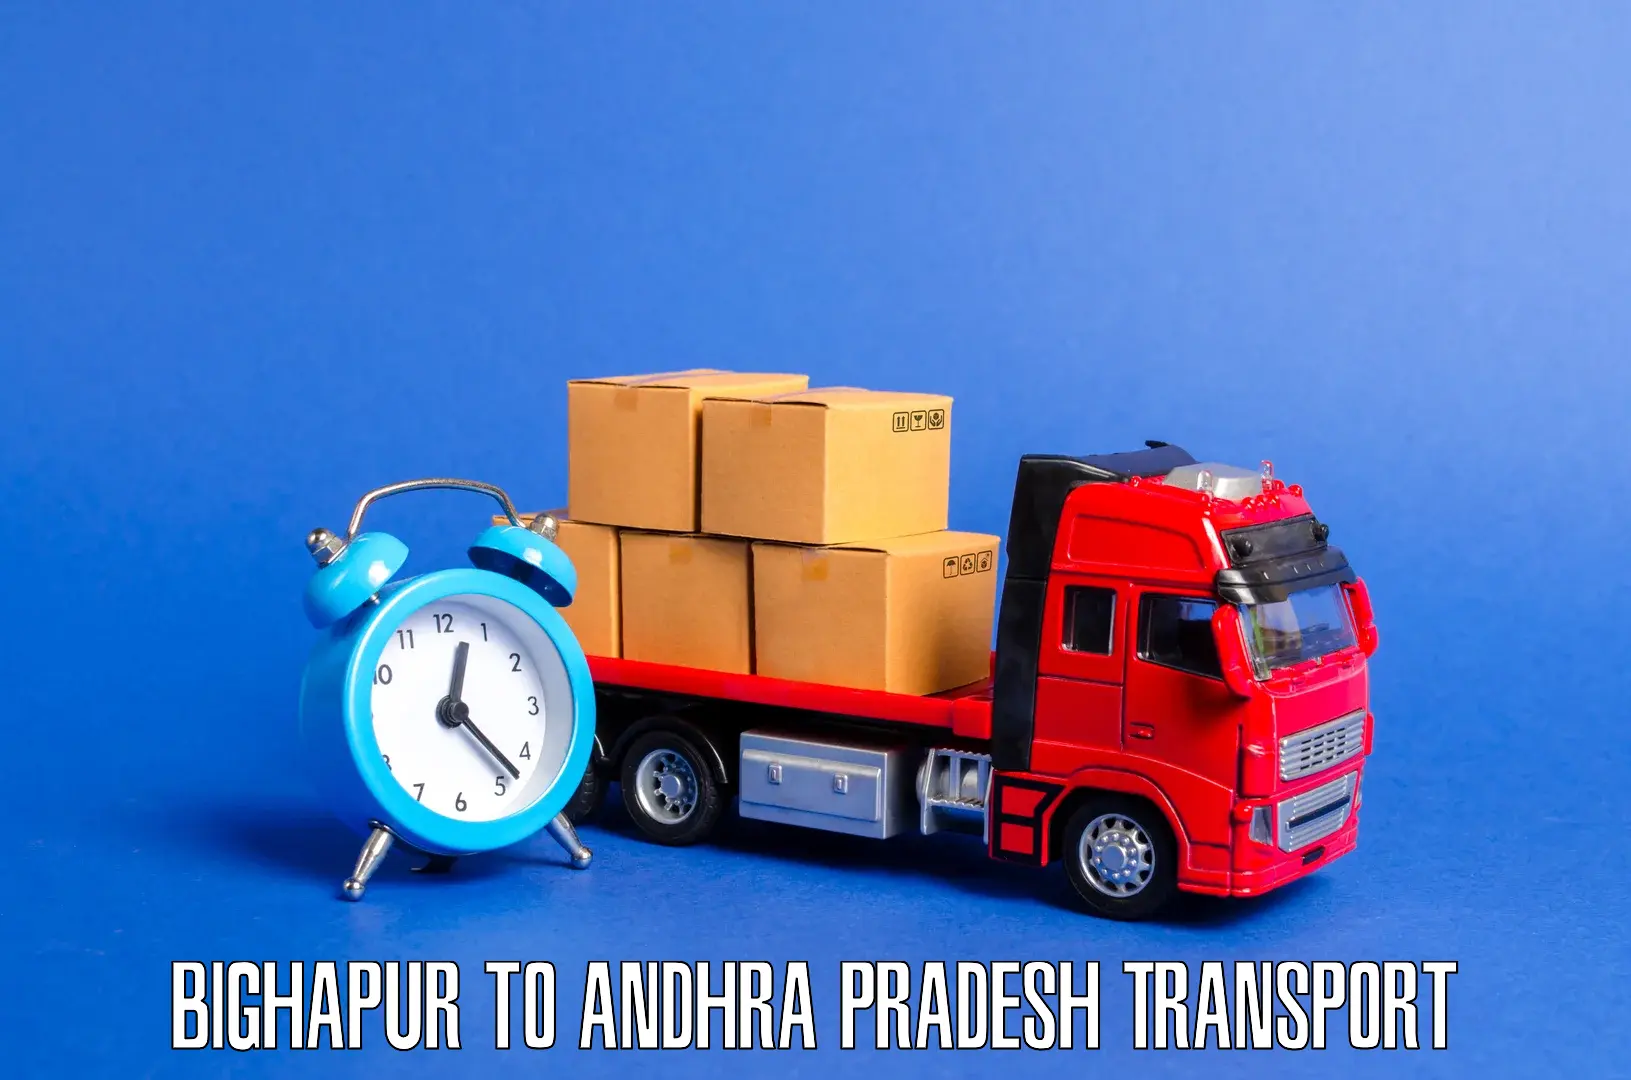 Goods delivery service Bighapur to Dhone